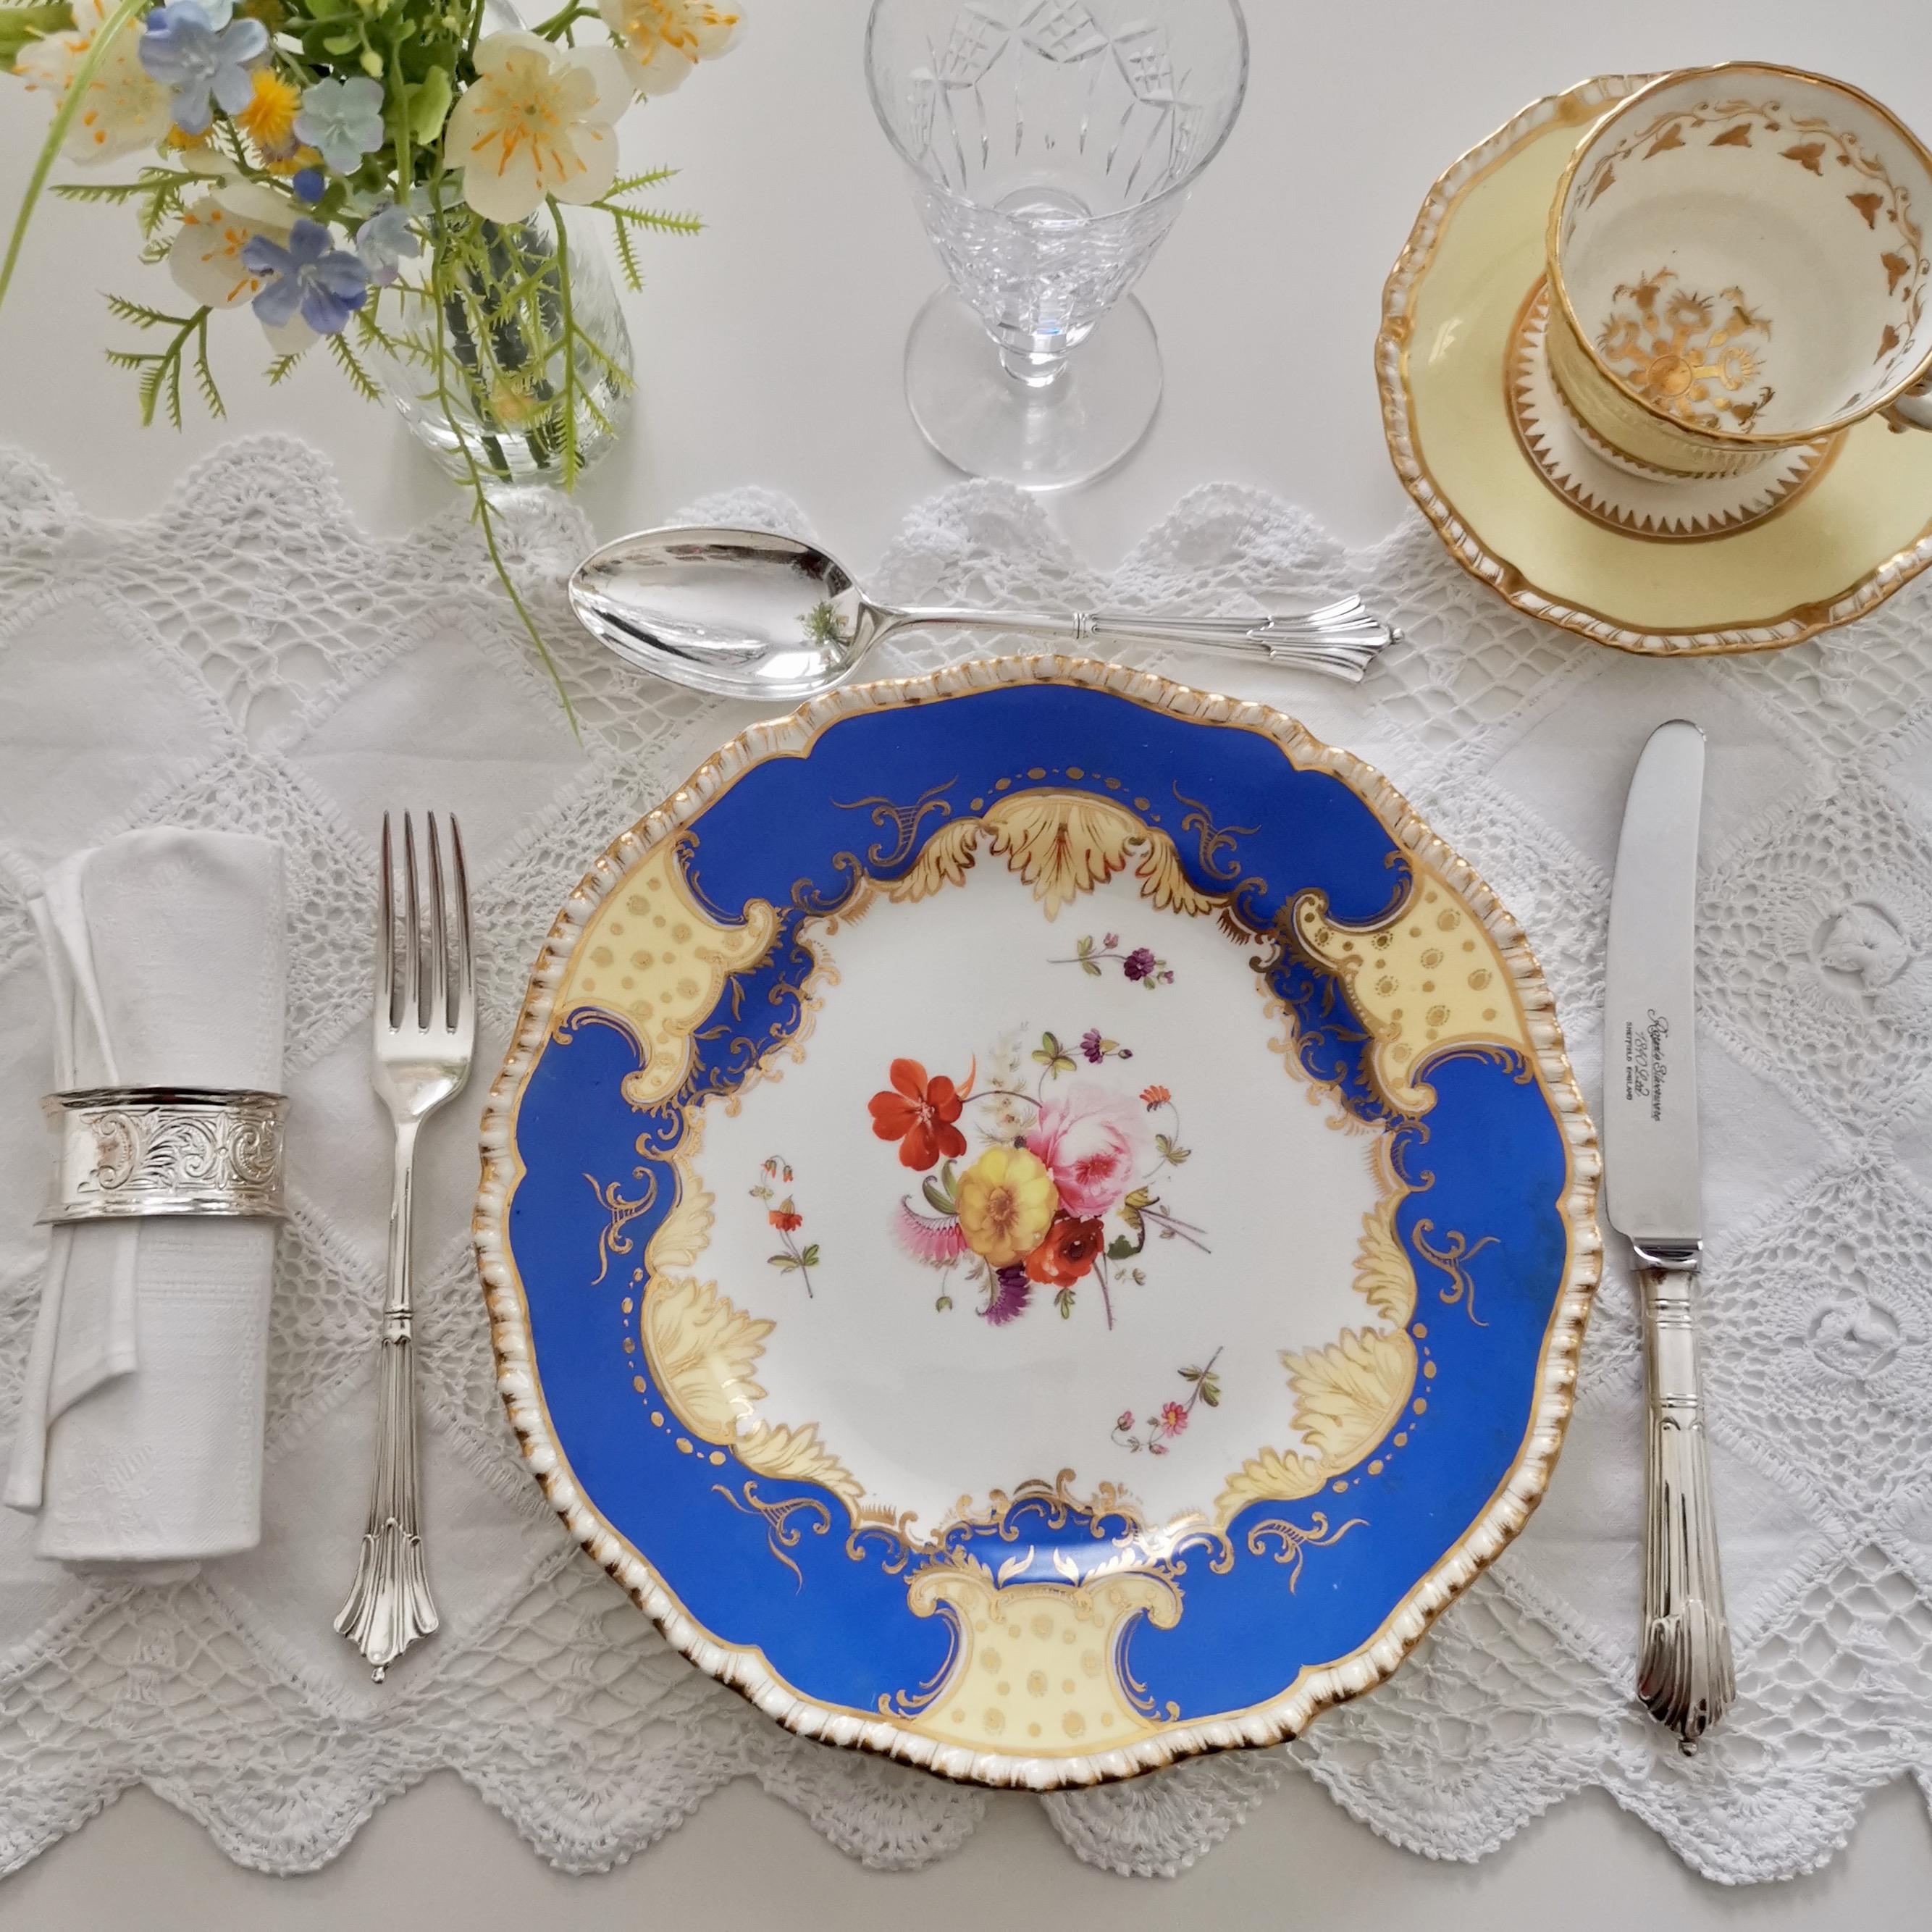 This is a beautiful dessert plate made by Coalport circa 1825, which was the Regency era. The plate has a beautifully gadrooned rim, a bright blue ground with pale yellow and gilt details and hand painted flowers in the centre.

Coalport was one